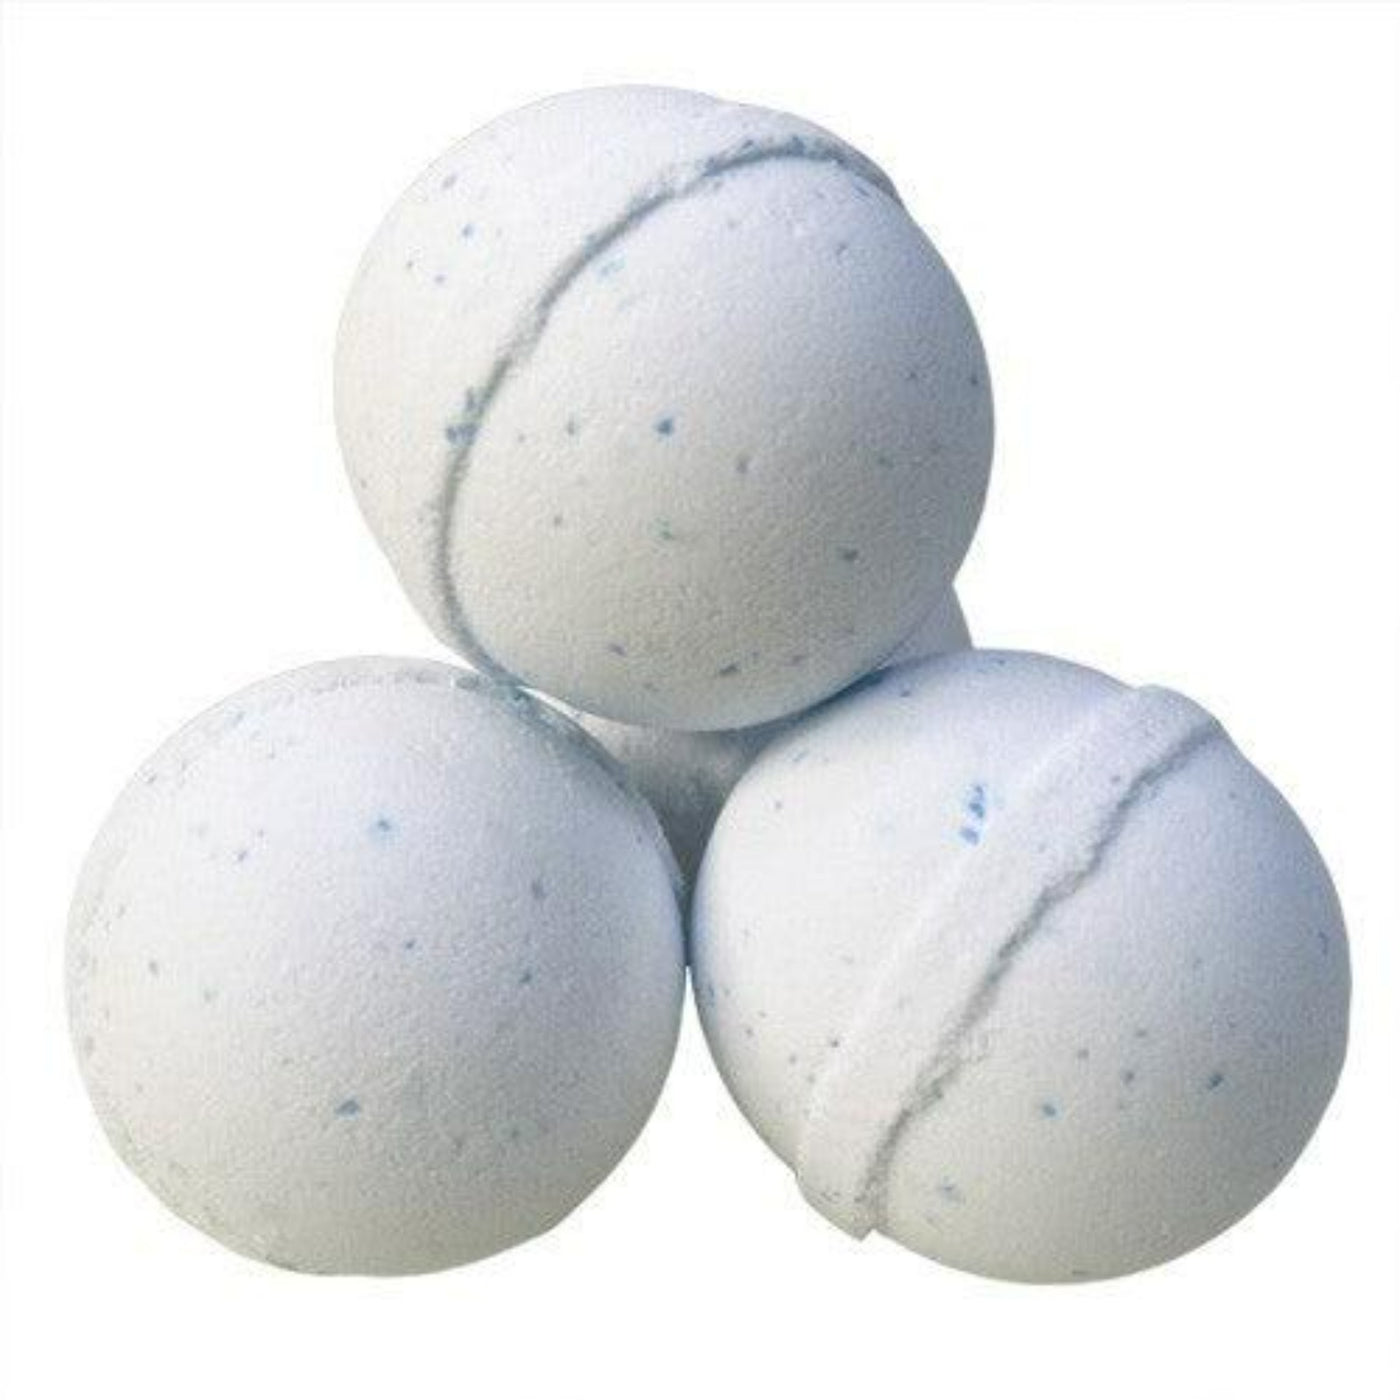 Aromatherapy Essential Oils Potions Bath Bombs - Total Unwind.